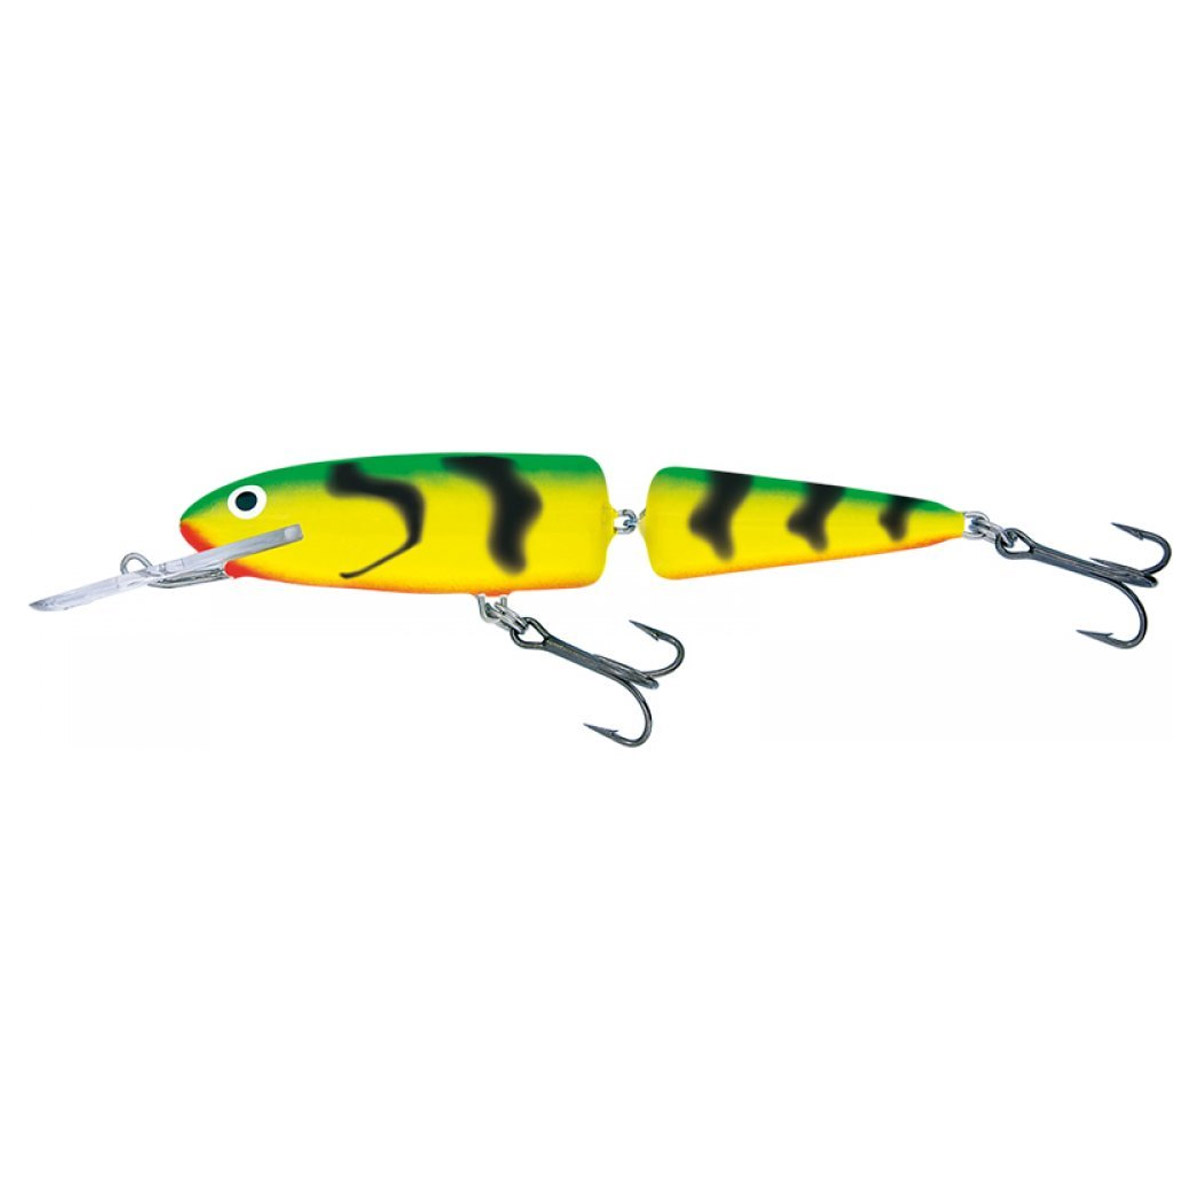 Salmo White Fish Jointed Floating DR Ltd Edition 13 CM -  Green Tiger